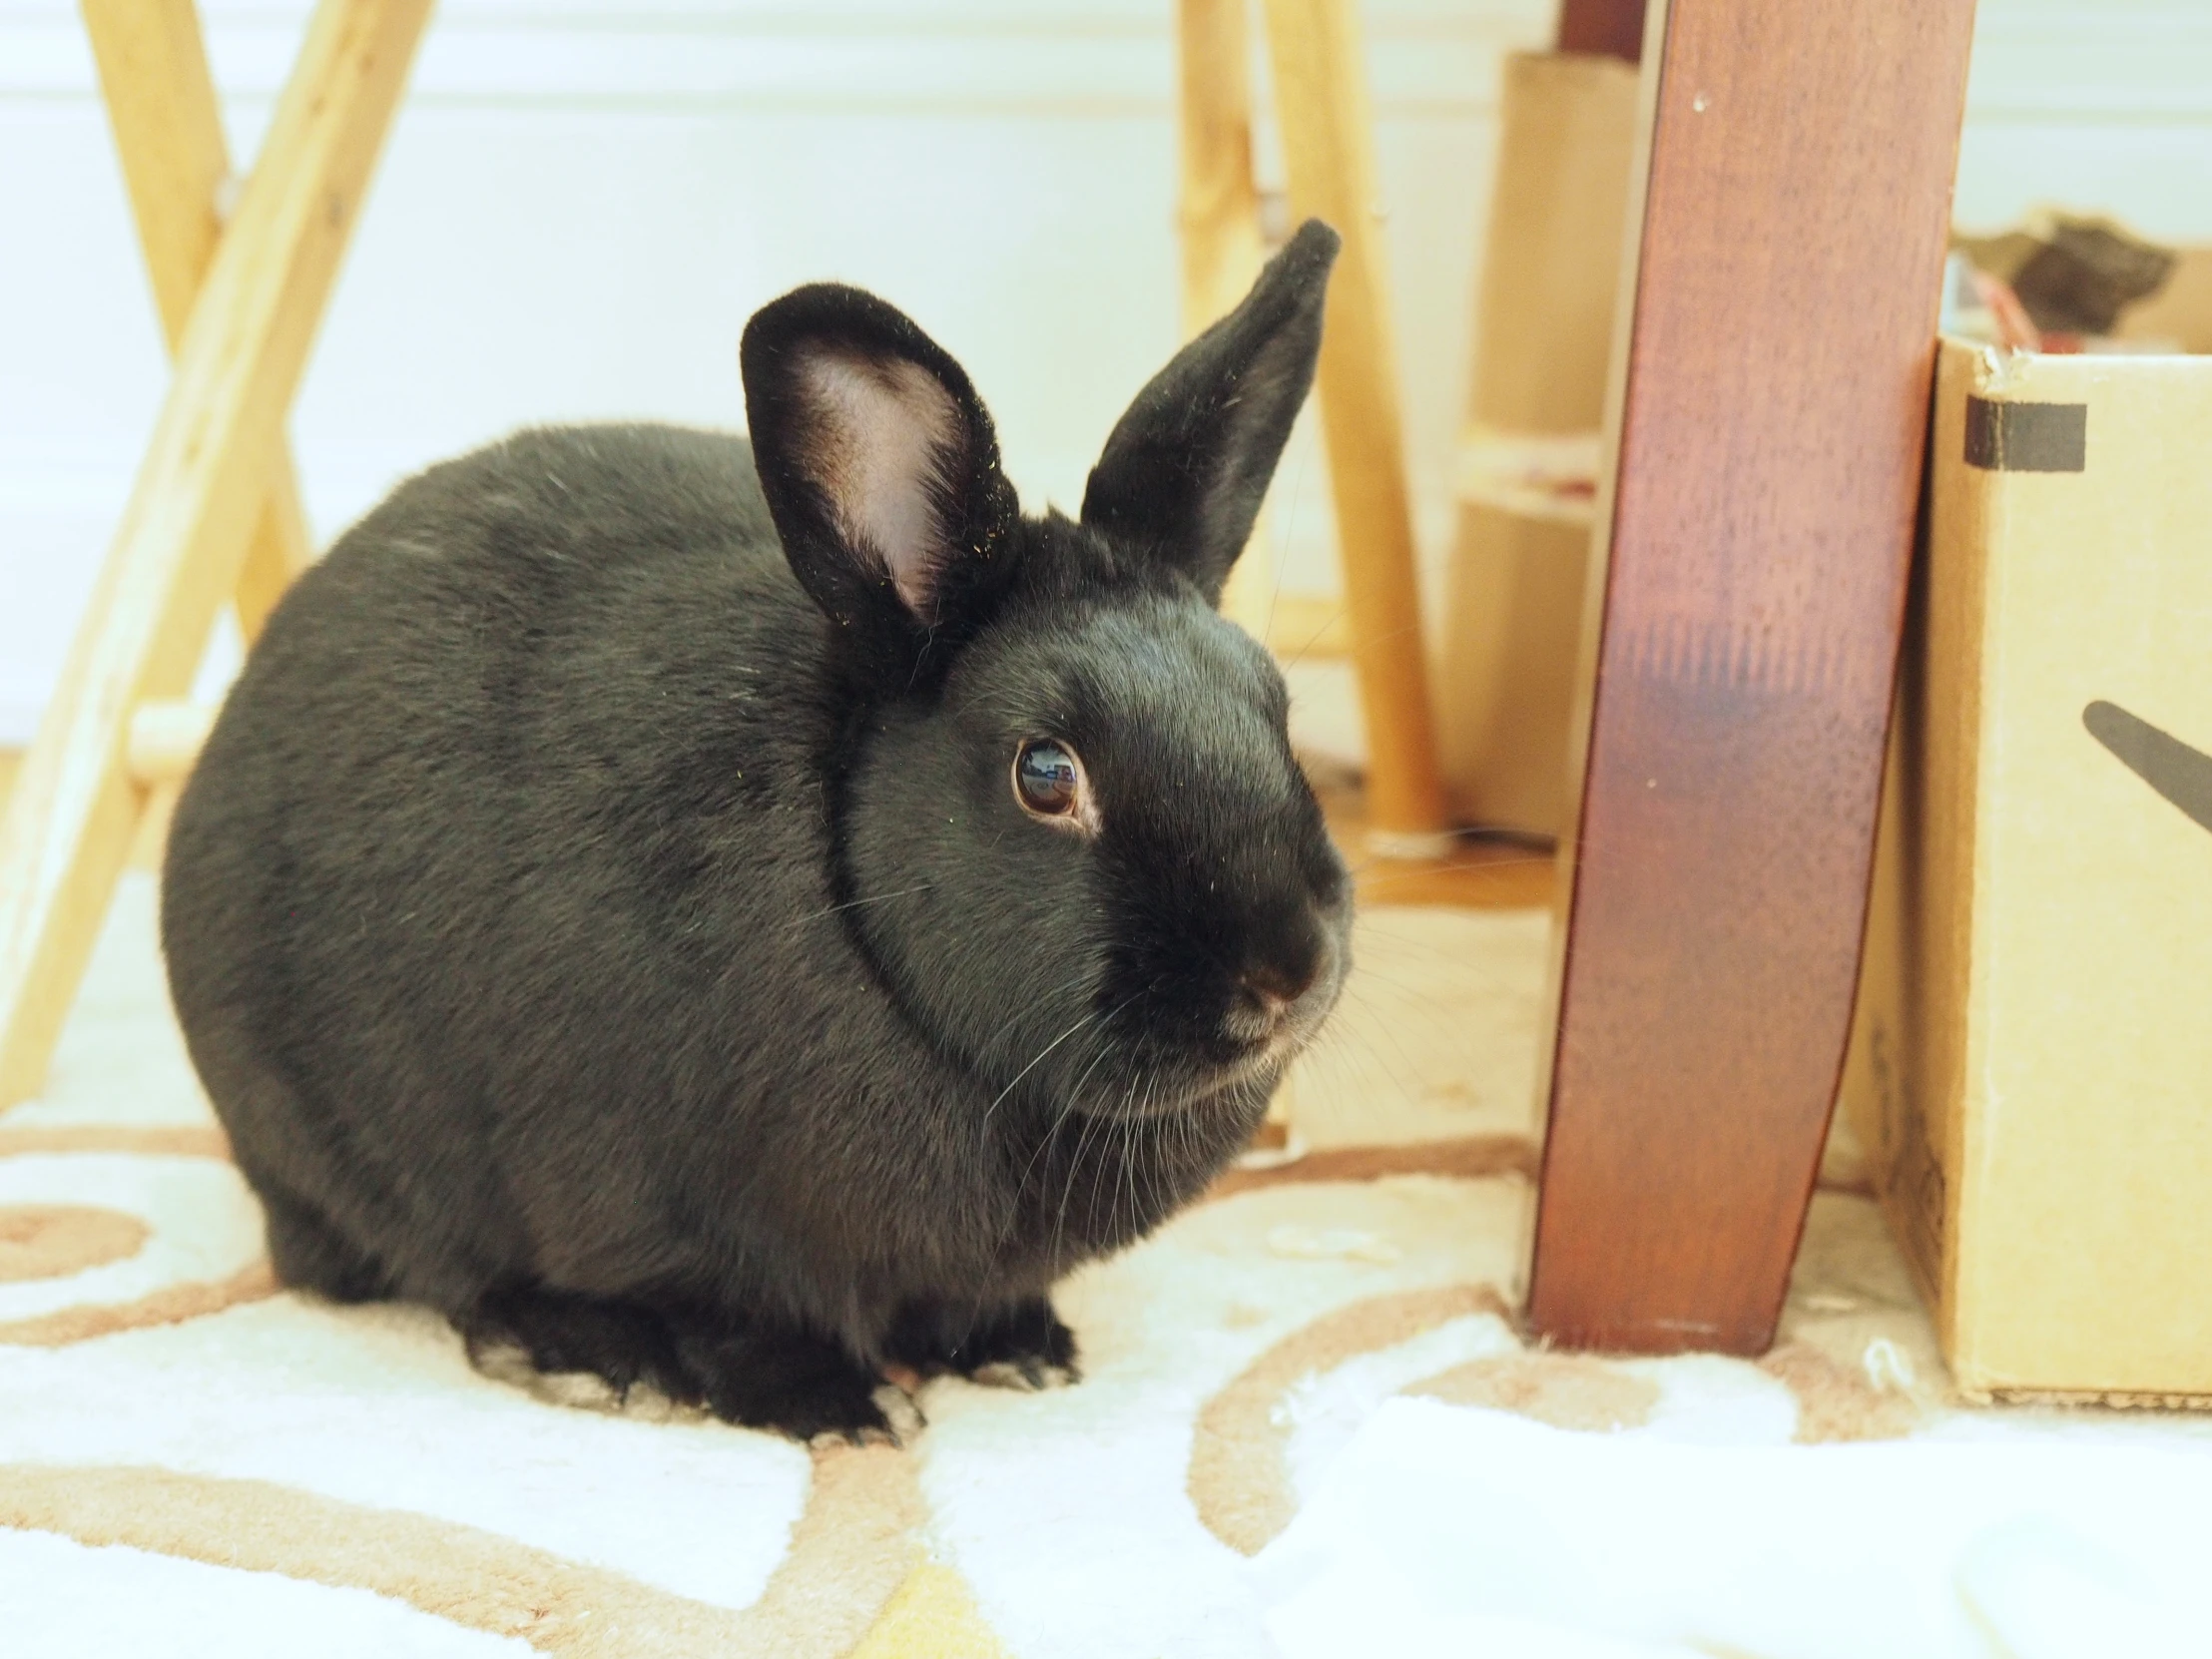 a black bunny rabbit next to wooden furniture